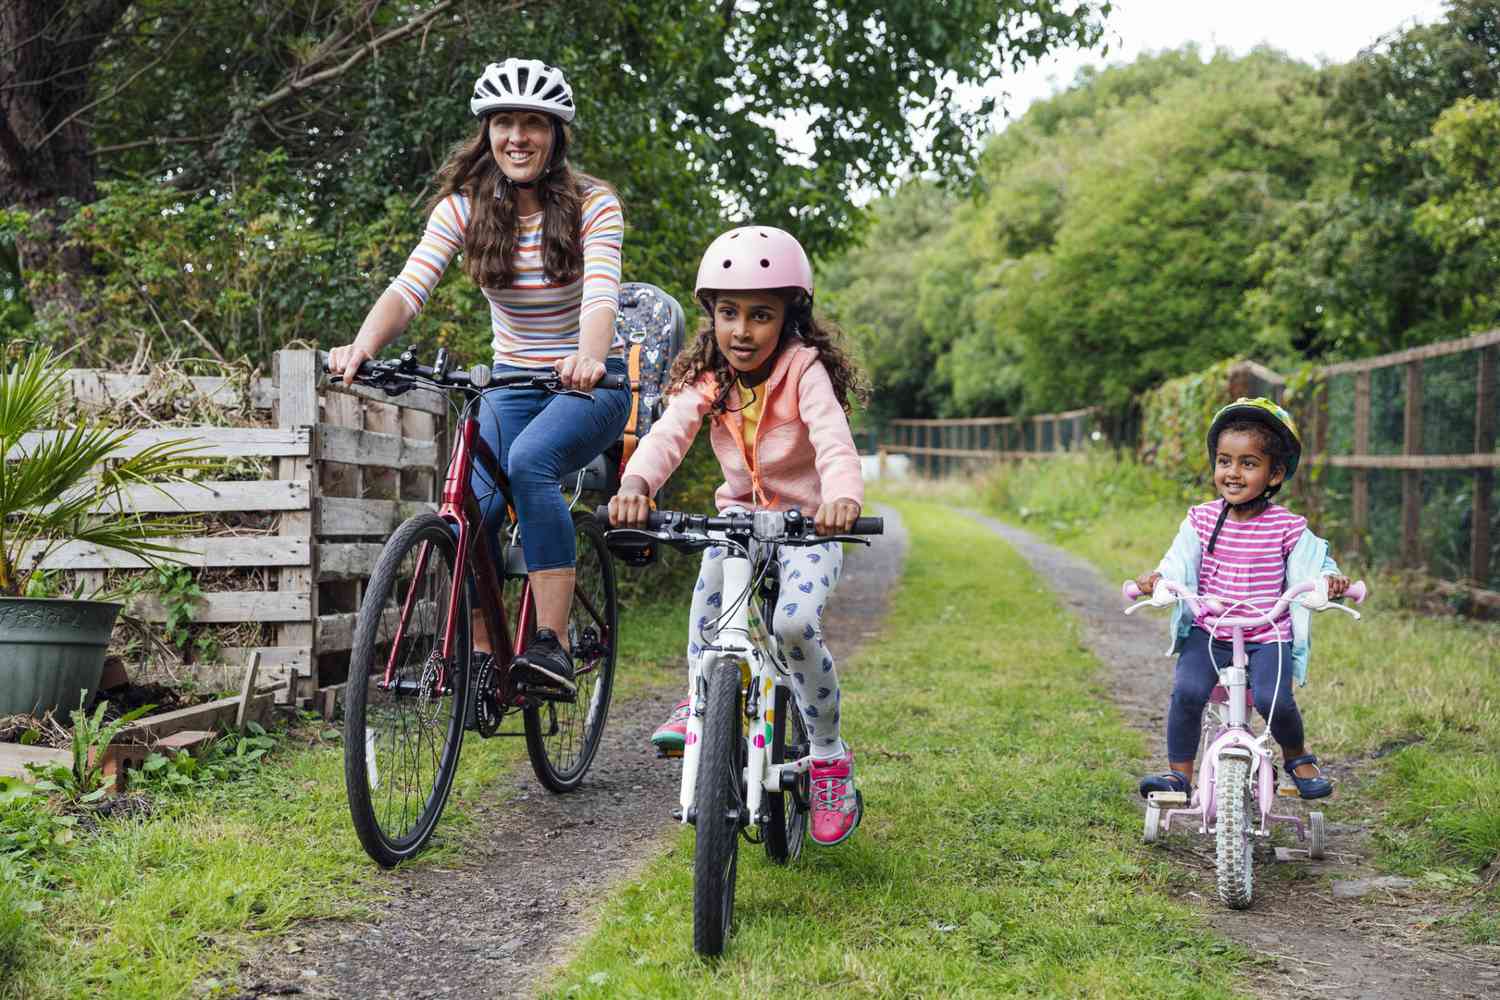 An image of a mom riding bikes with her daughter.